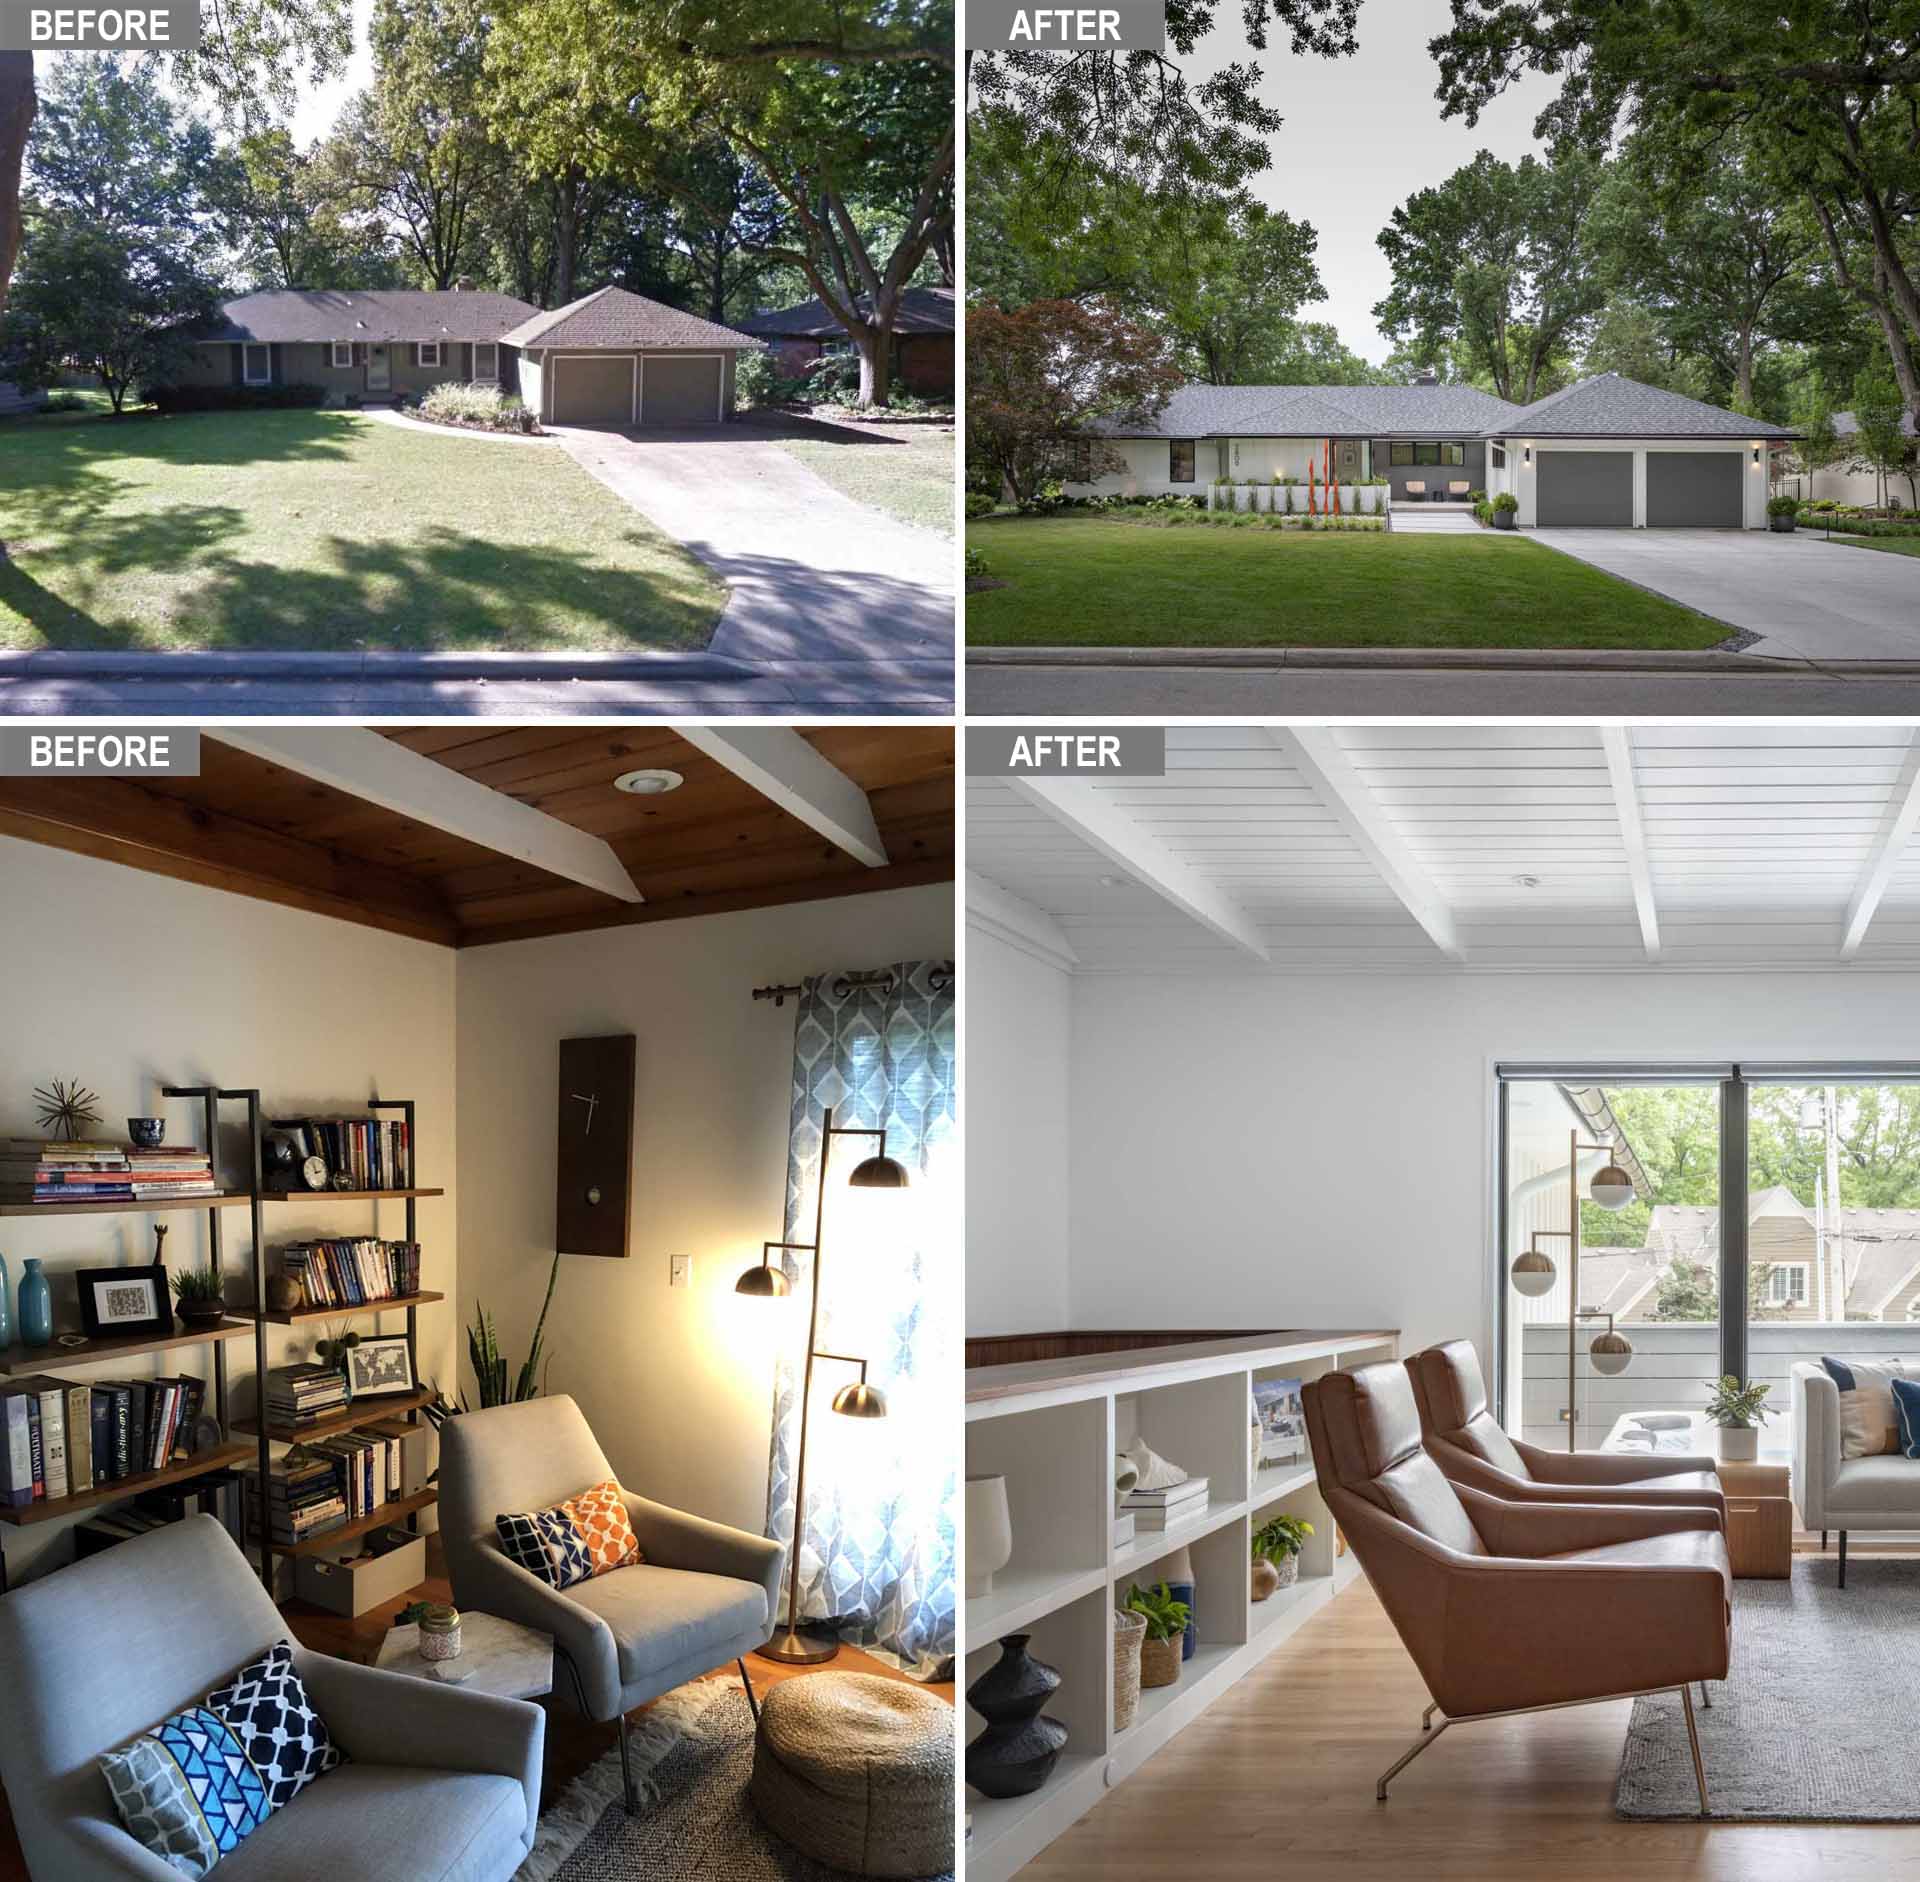 FORWARD Design | Architecture has sent us photos of a home renovation they completed for an existing mid-century ranch in Leawood, Kansas.